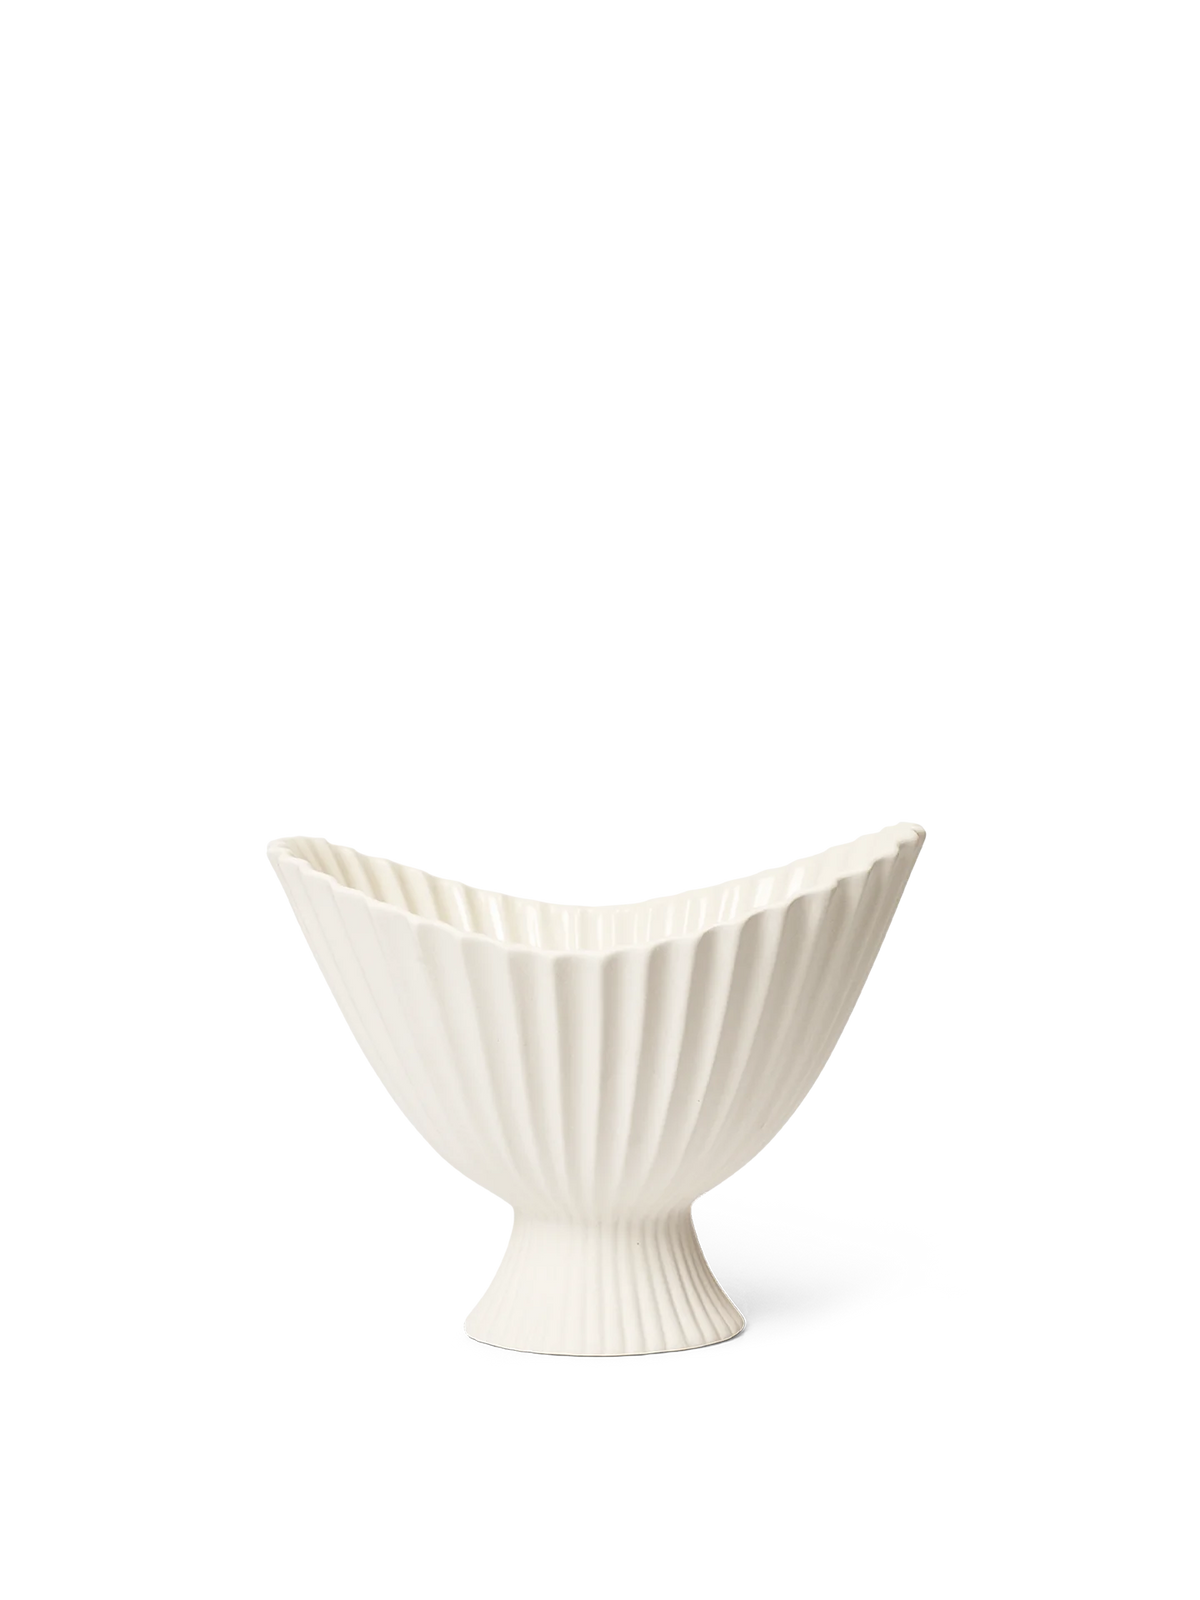 Fountain Bowl by Ferm Living